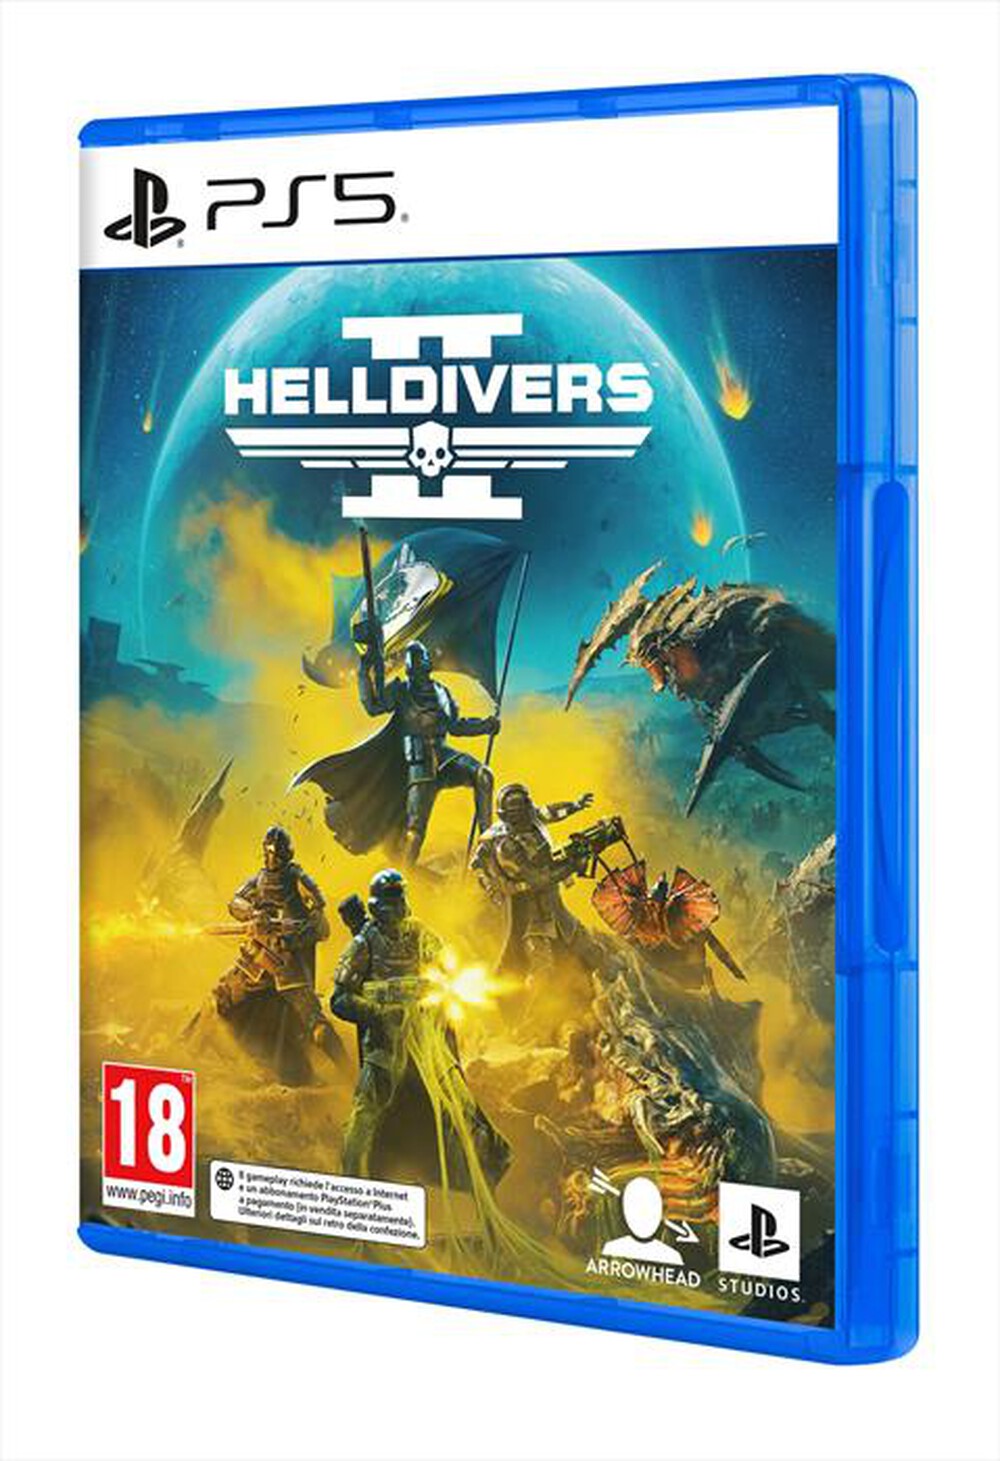 "SONY COMPUTER - HELLDIVERS 2 PS5"